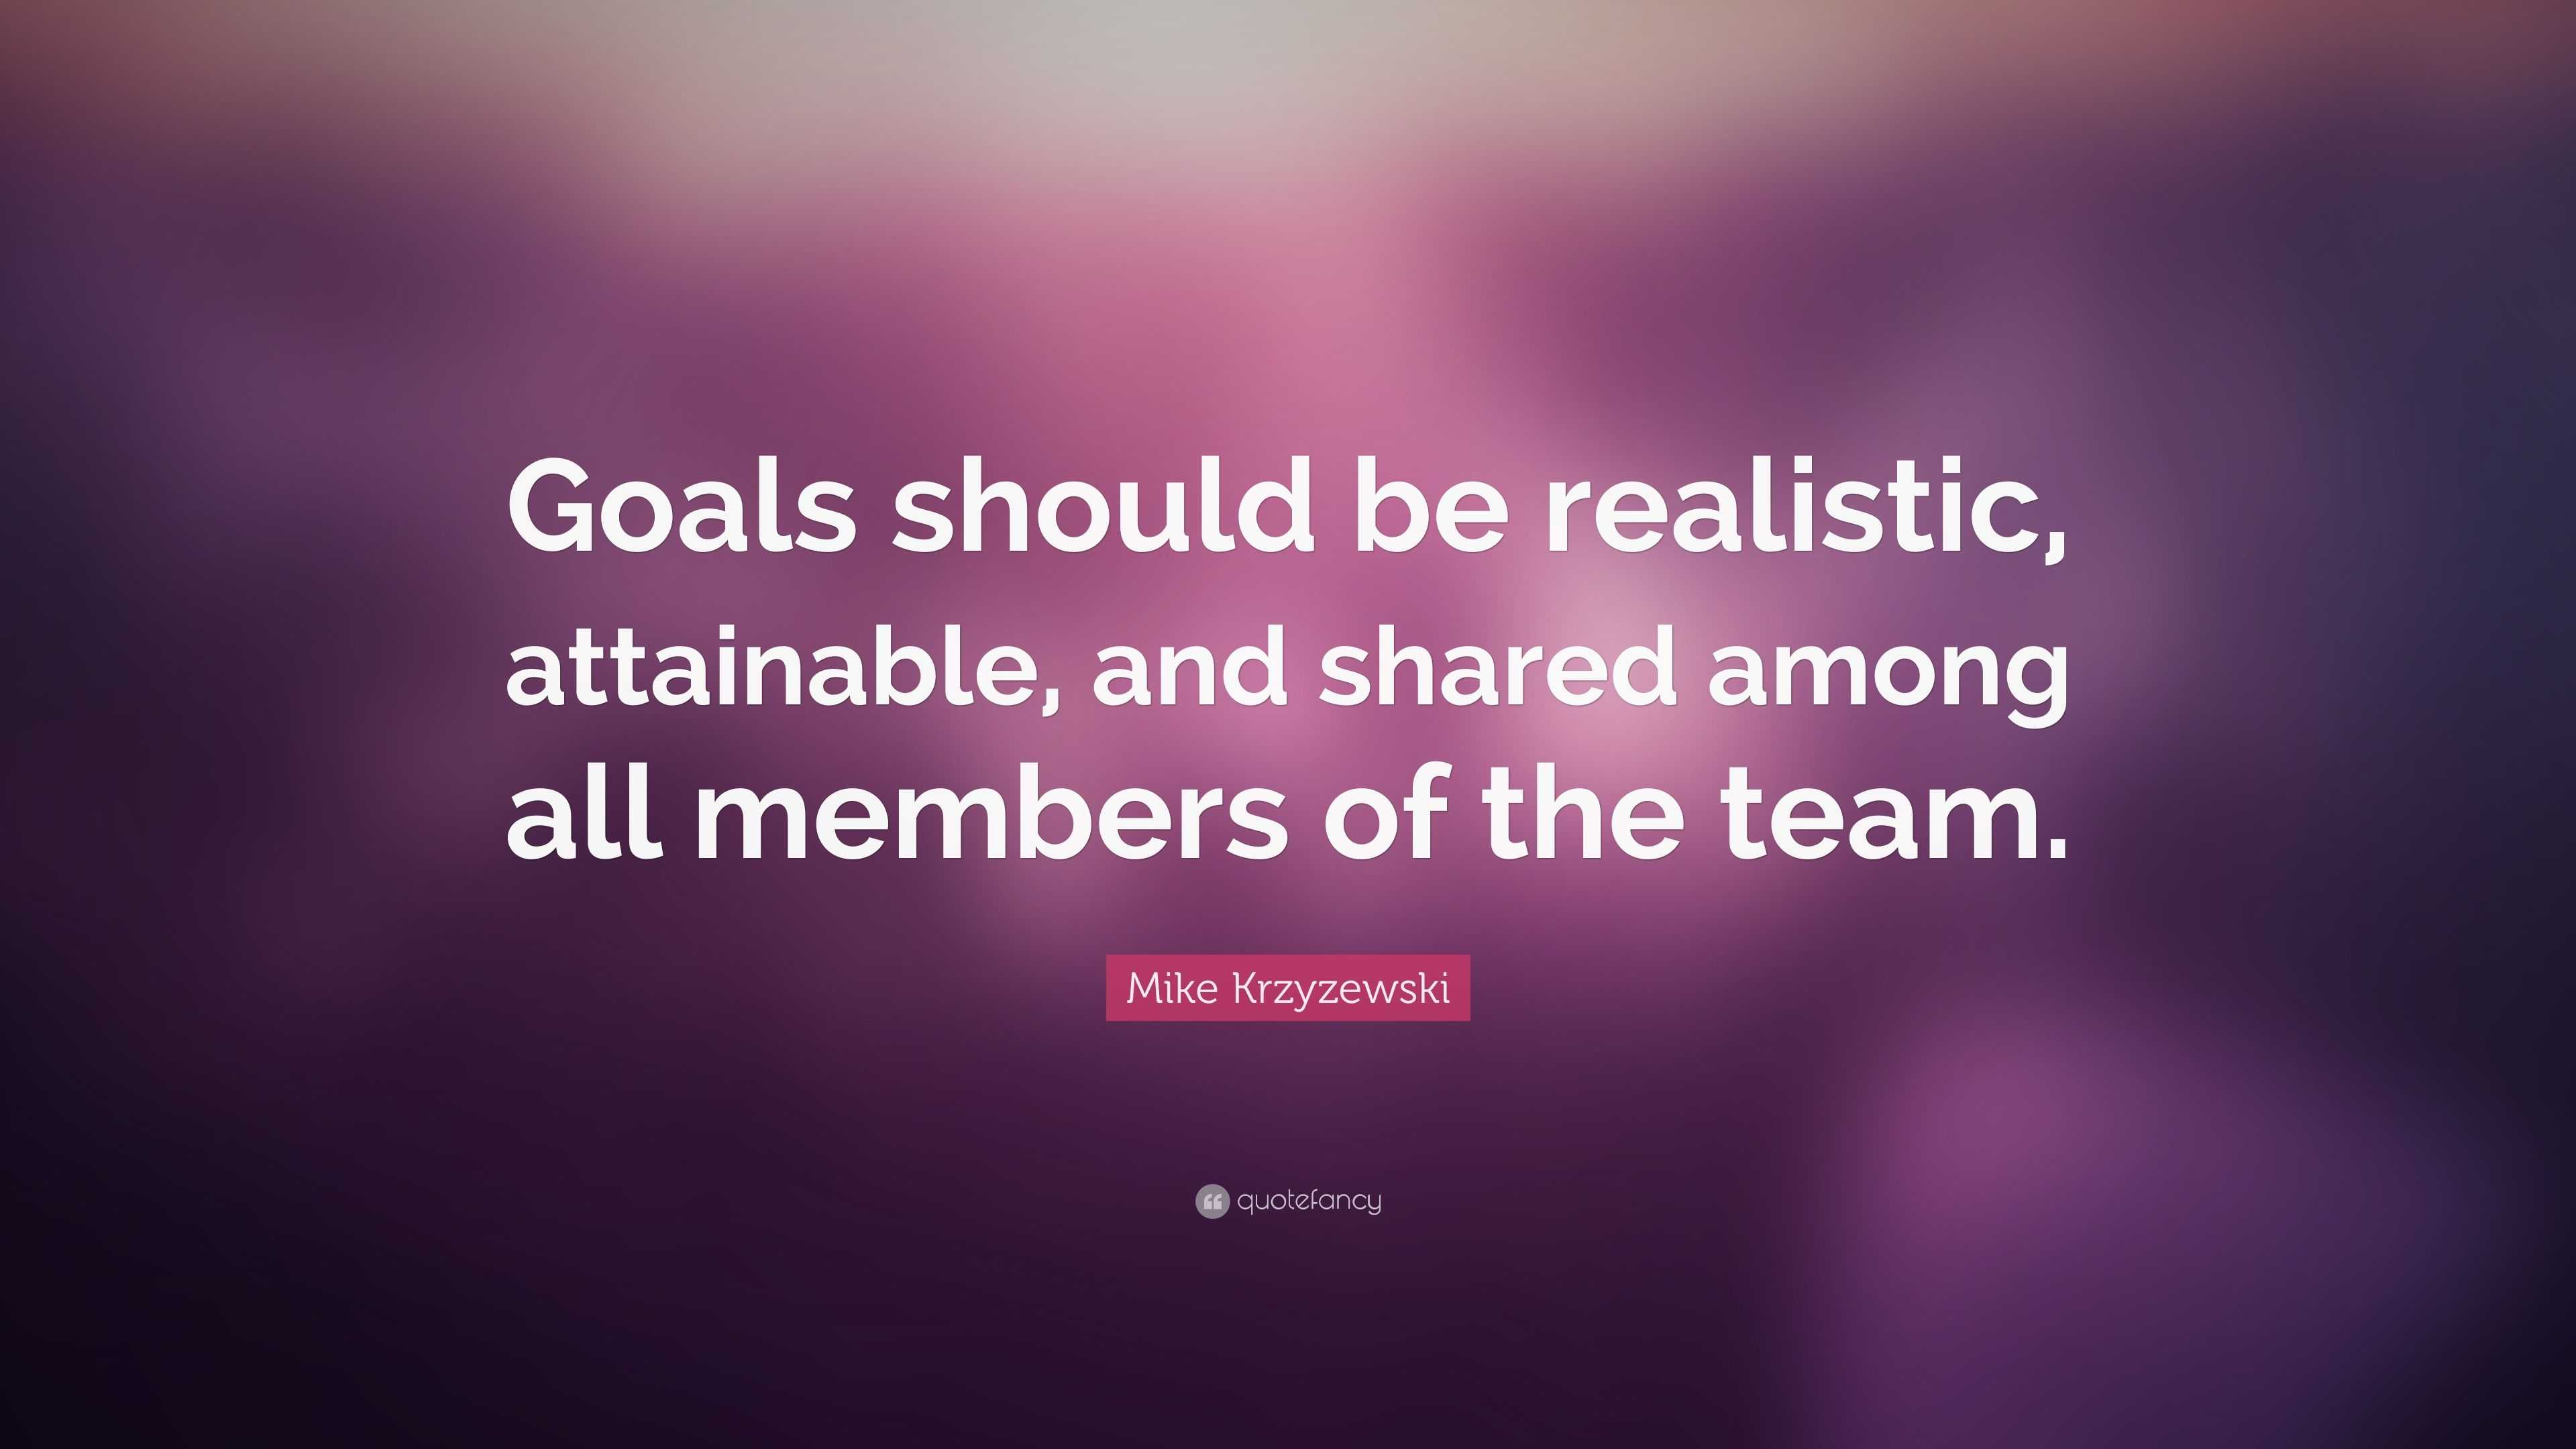 Mike Krzyzewski Quote: “Goals should be realistic, attainable, and ...